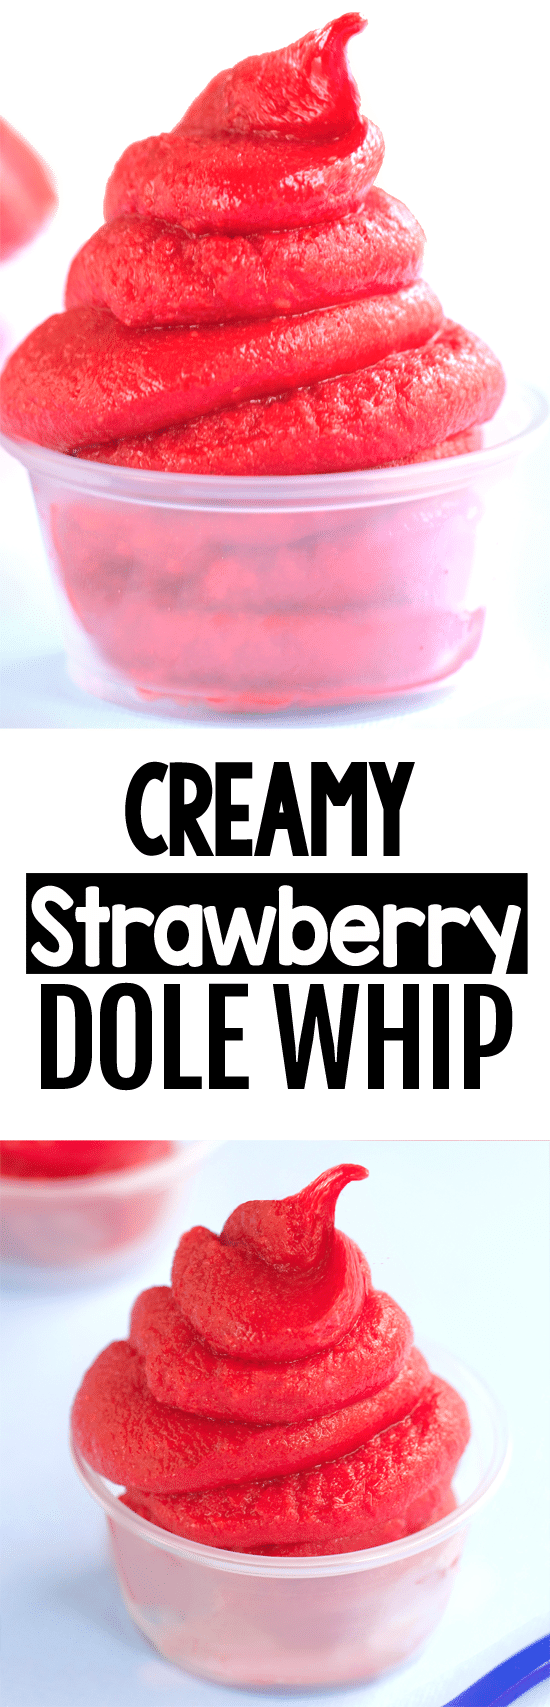 How To Make Strawberry Dole Whip (Vegan)